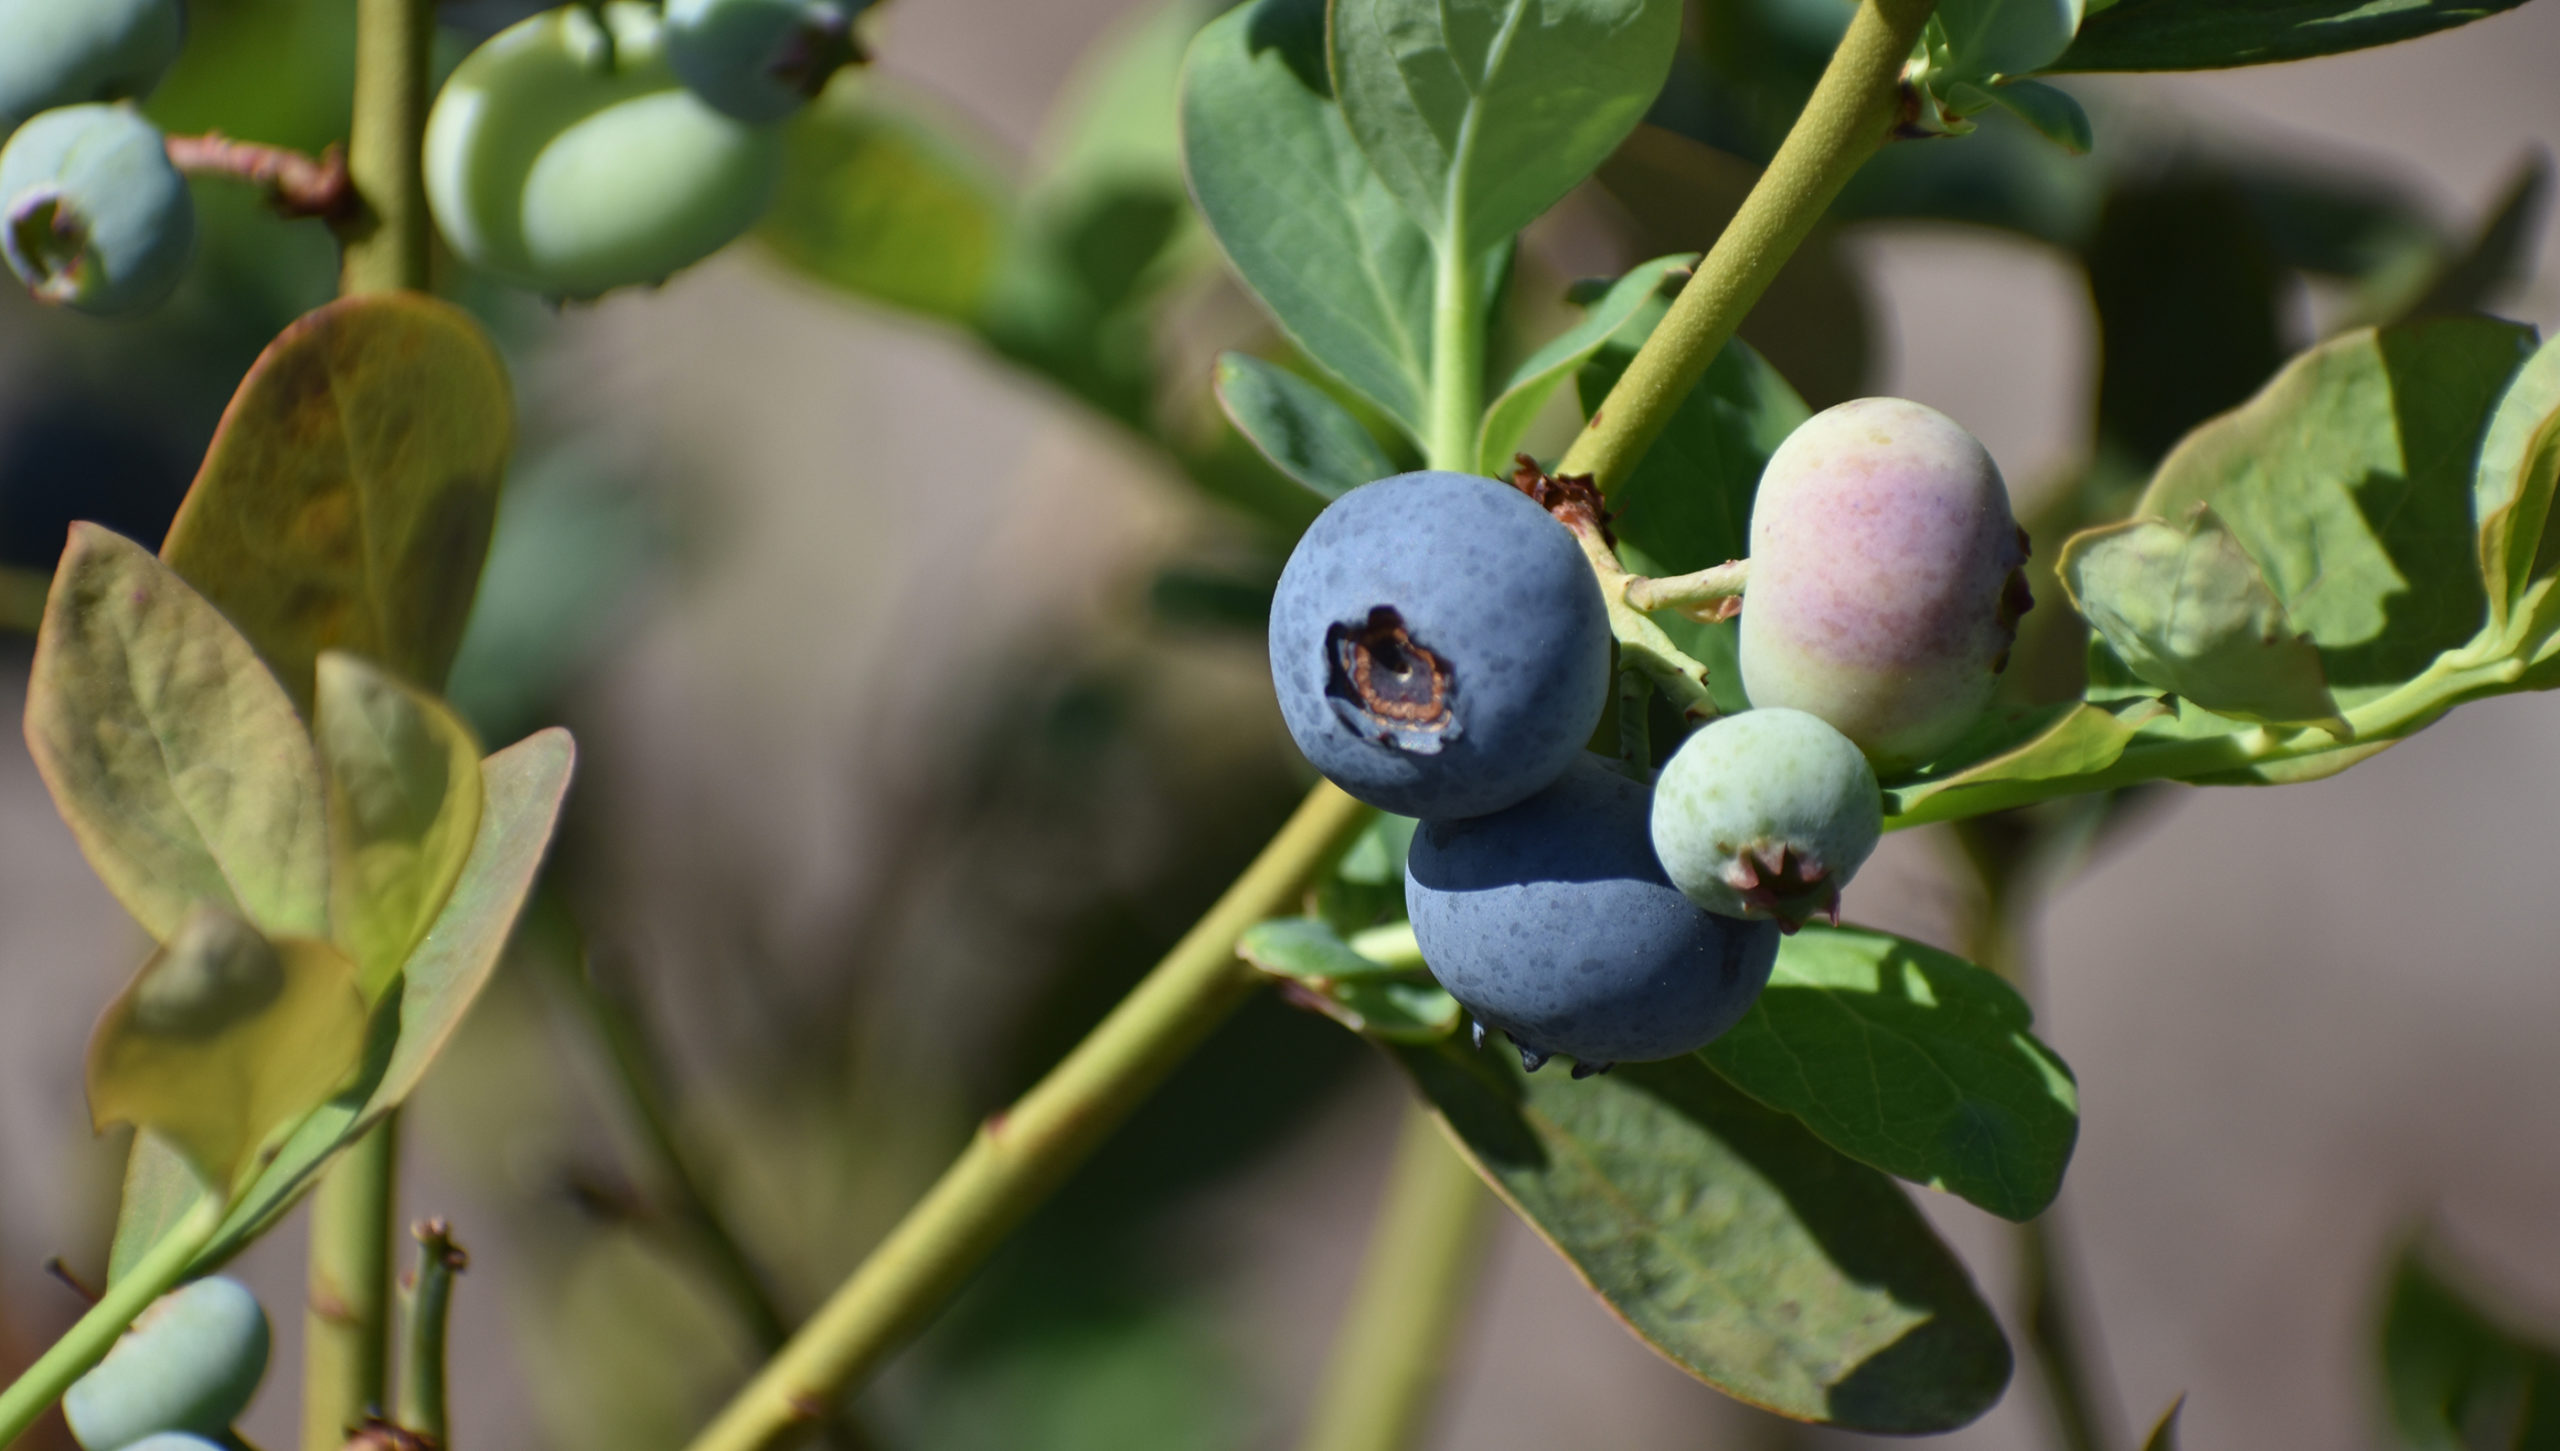 Featured image for “Florida Blueberry Producer Discusses Season”